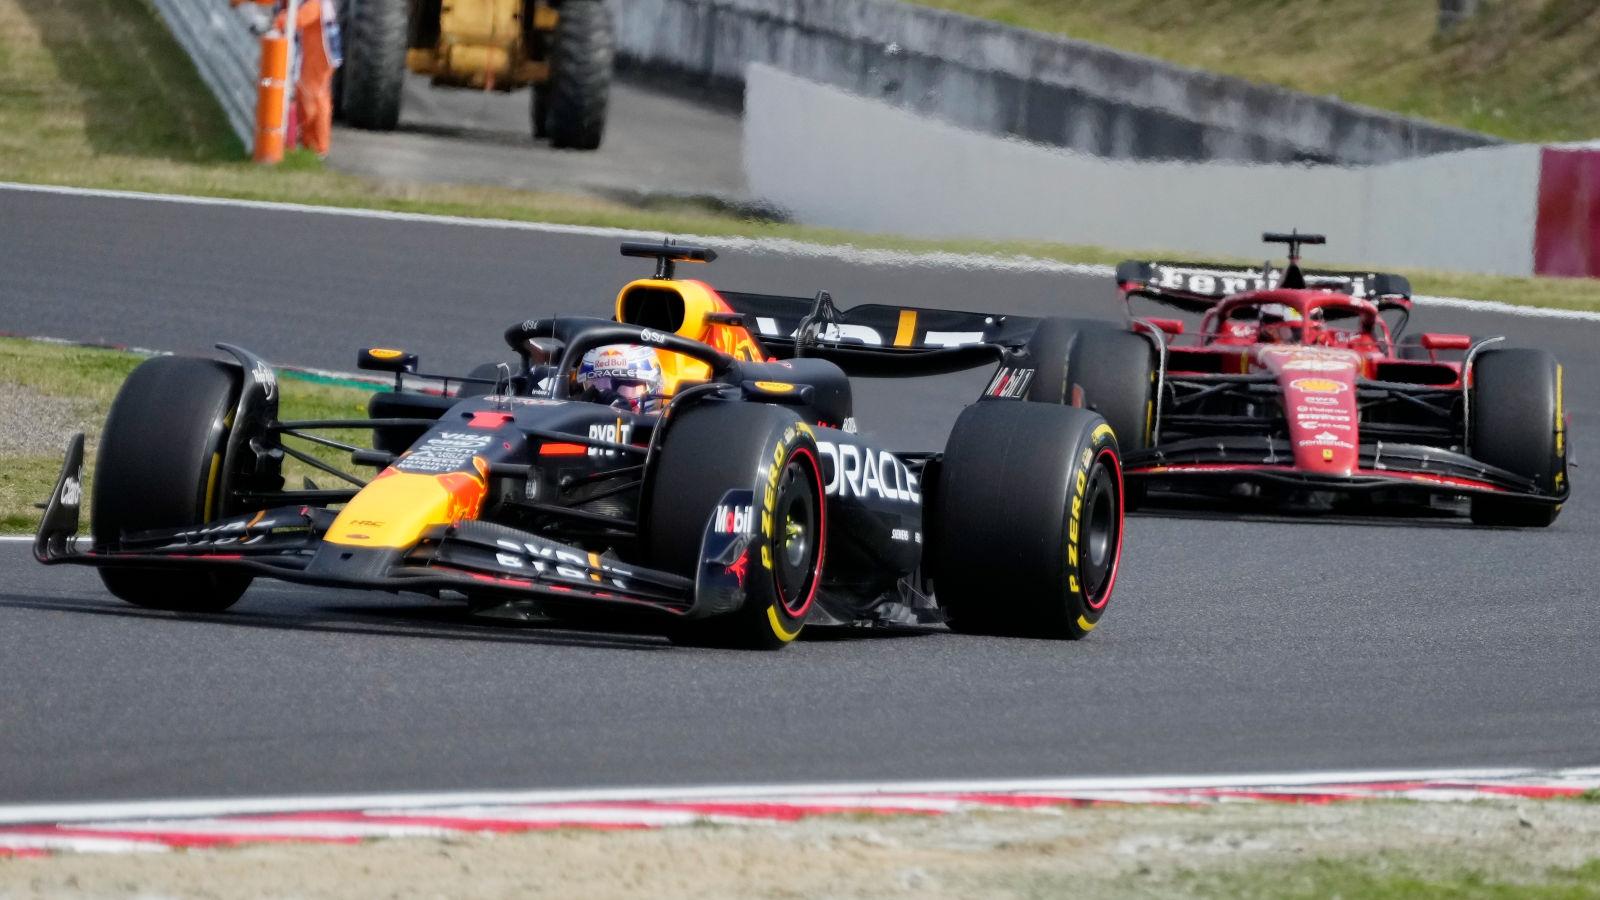 Max Verstappen leads Charles Leclerc at the Japanese Grand Prix